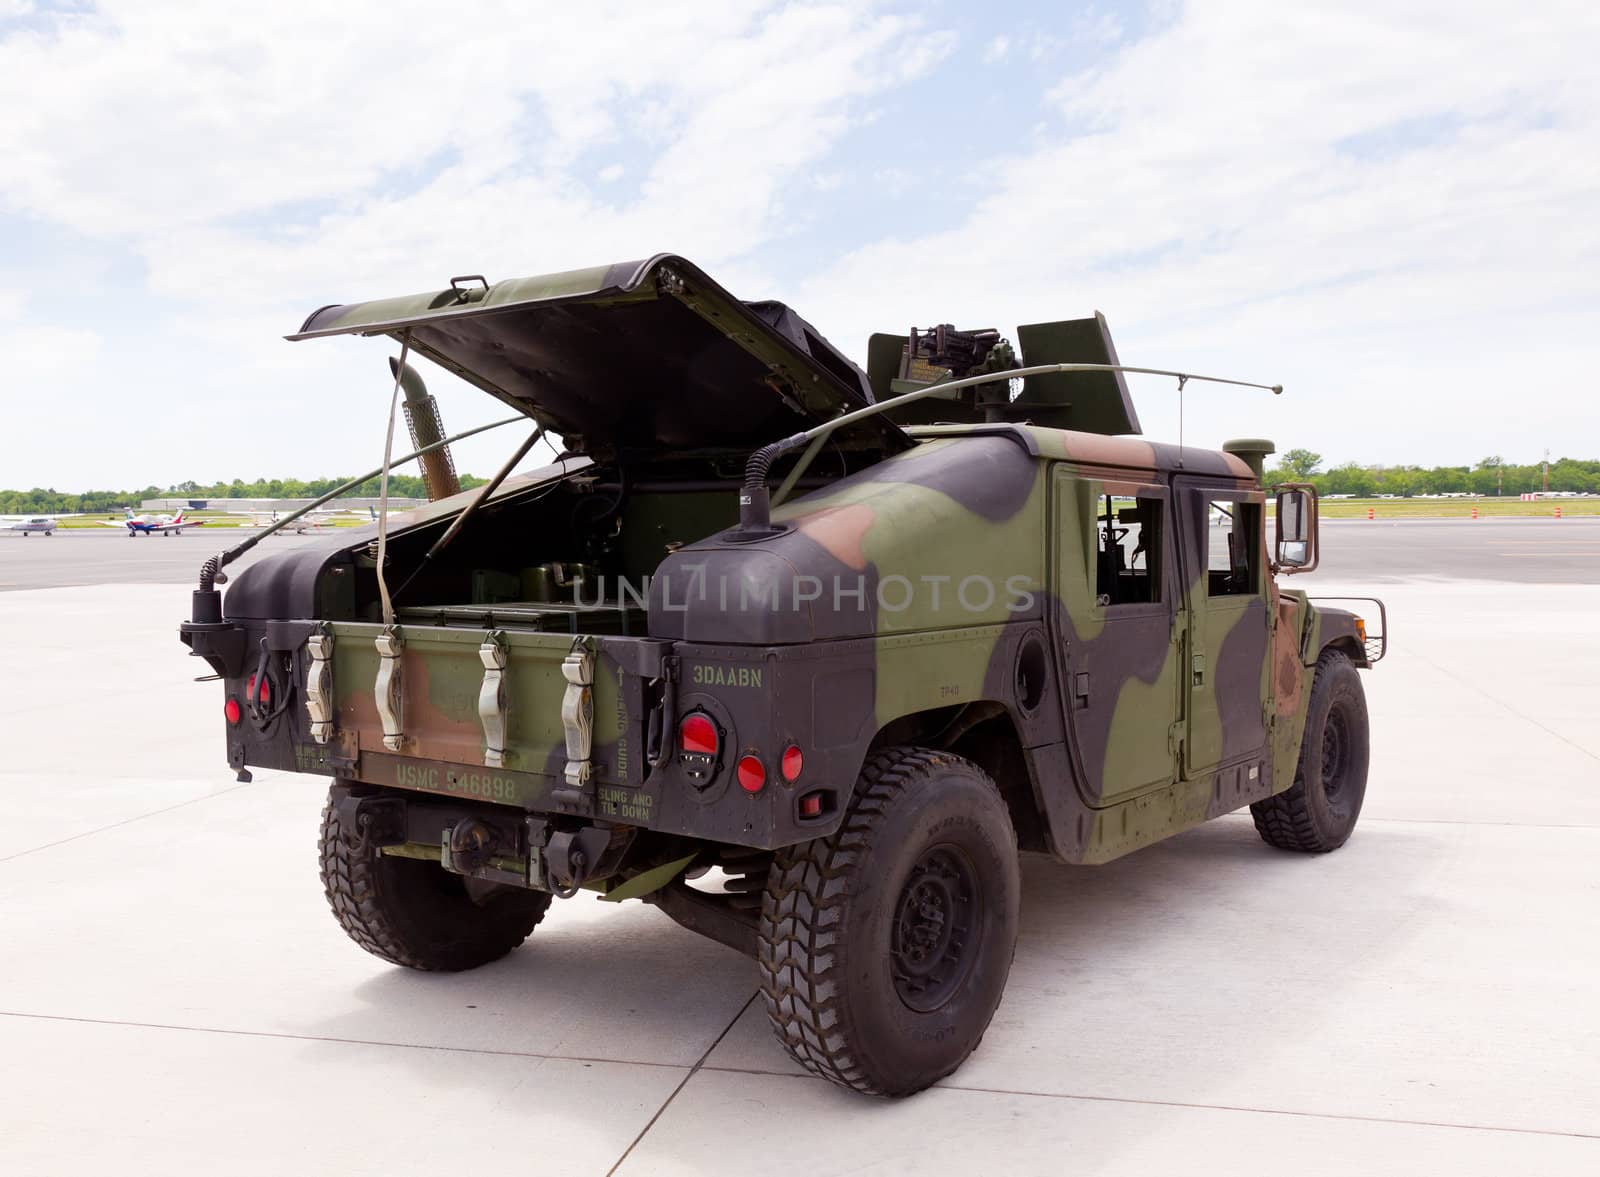 Army camouflaged Humvee truck by steheap